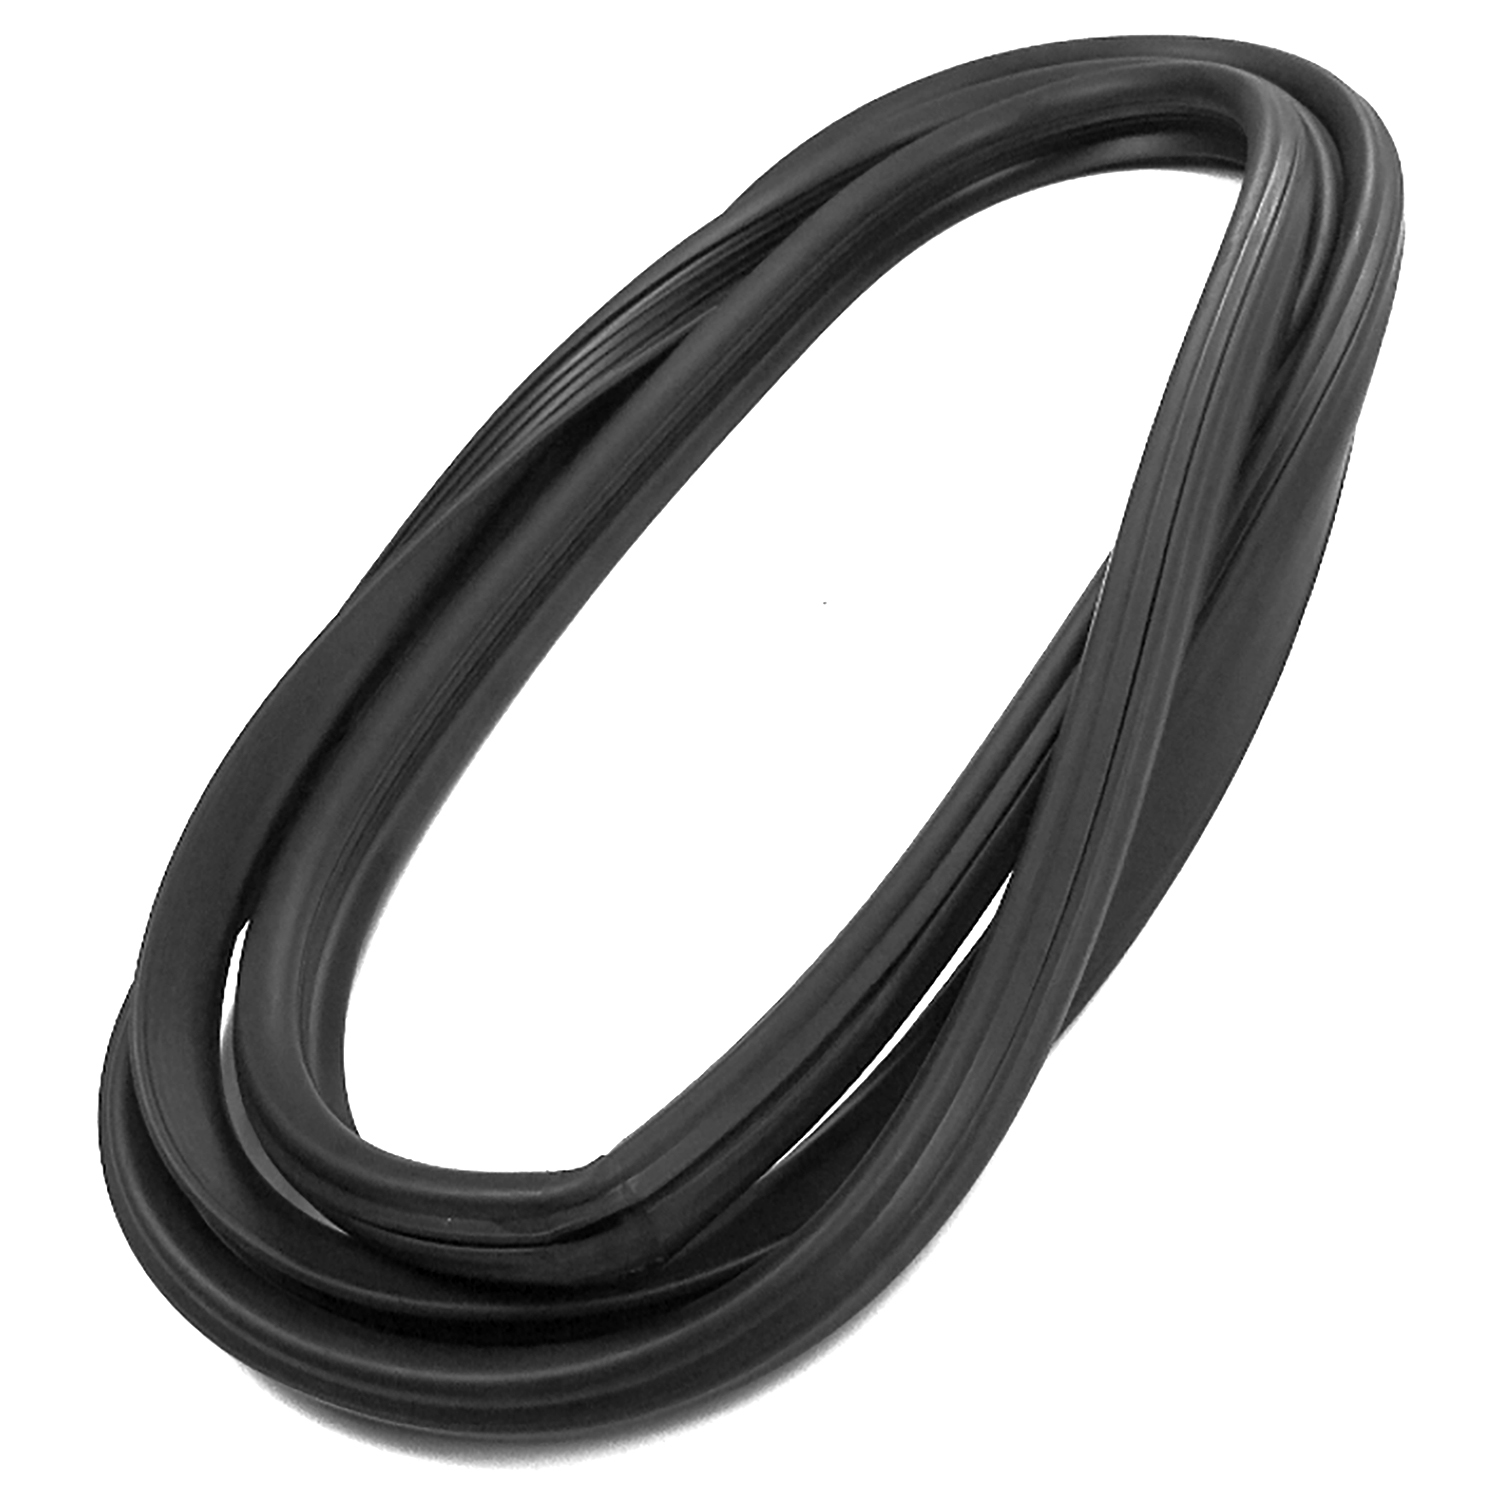 1963 Ford F-250 Windshield Seal, 61-66 Ford Full Size Pickup, Without Trim Groove, Each-VWS 3304-B